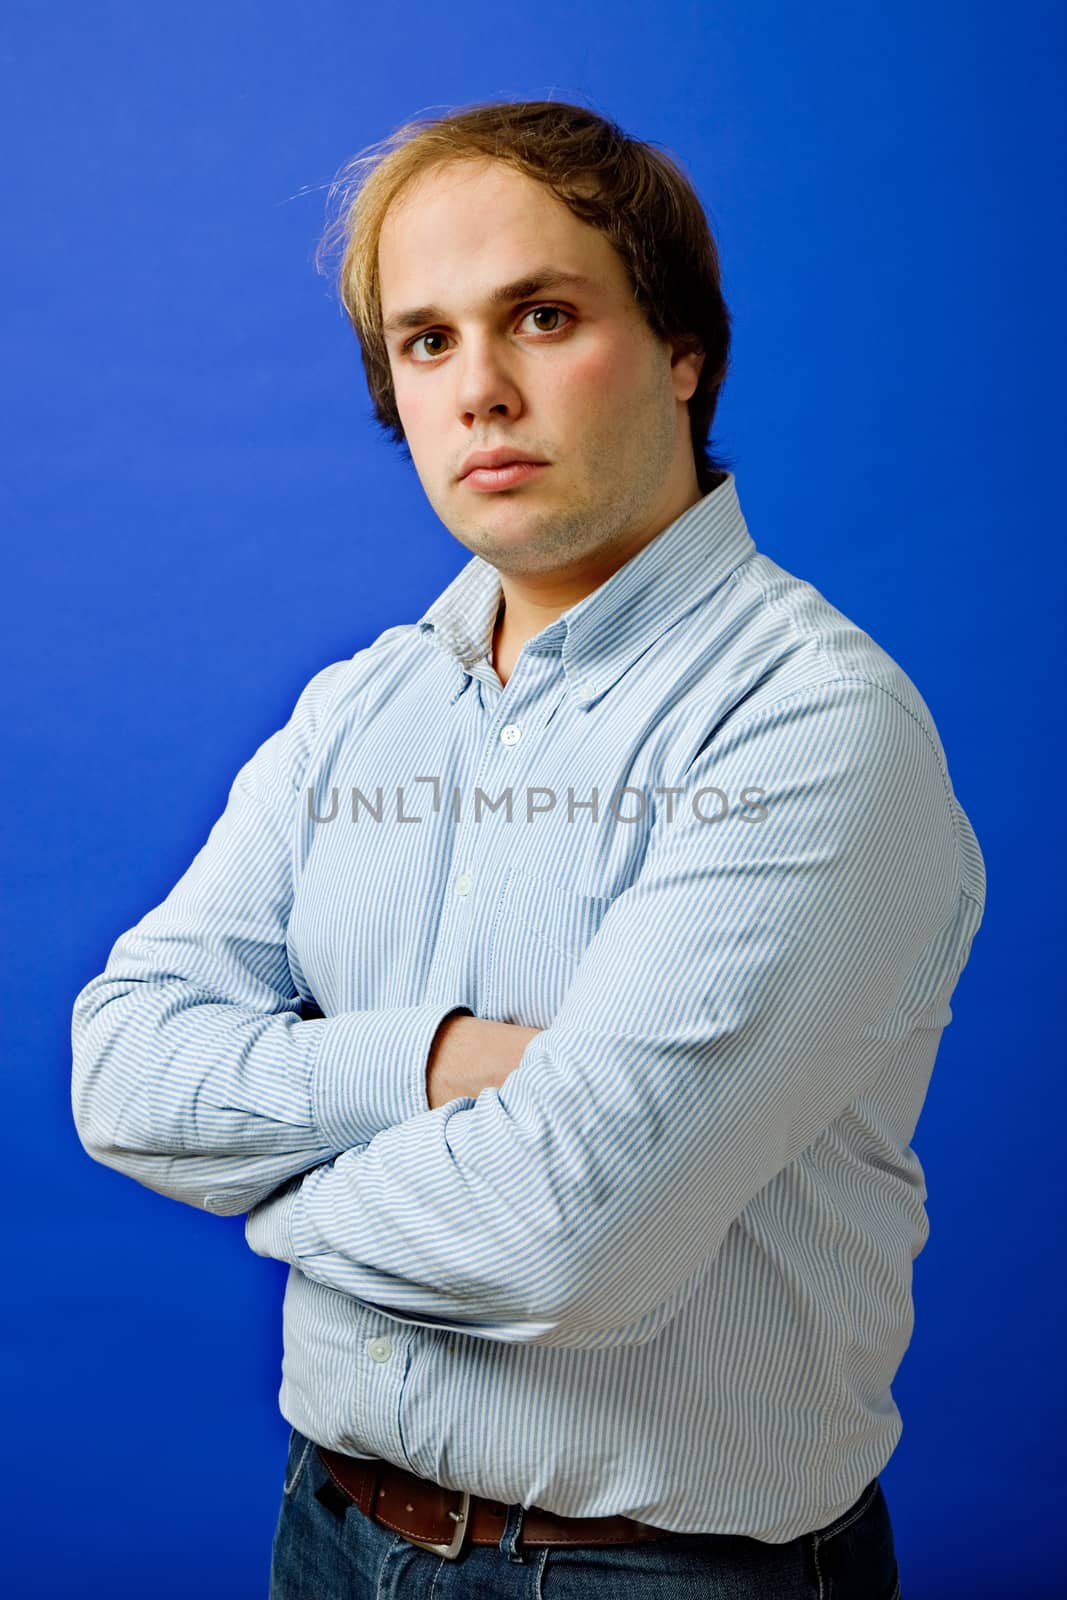 an young man portrait over a blue background